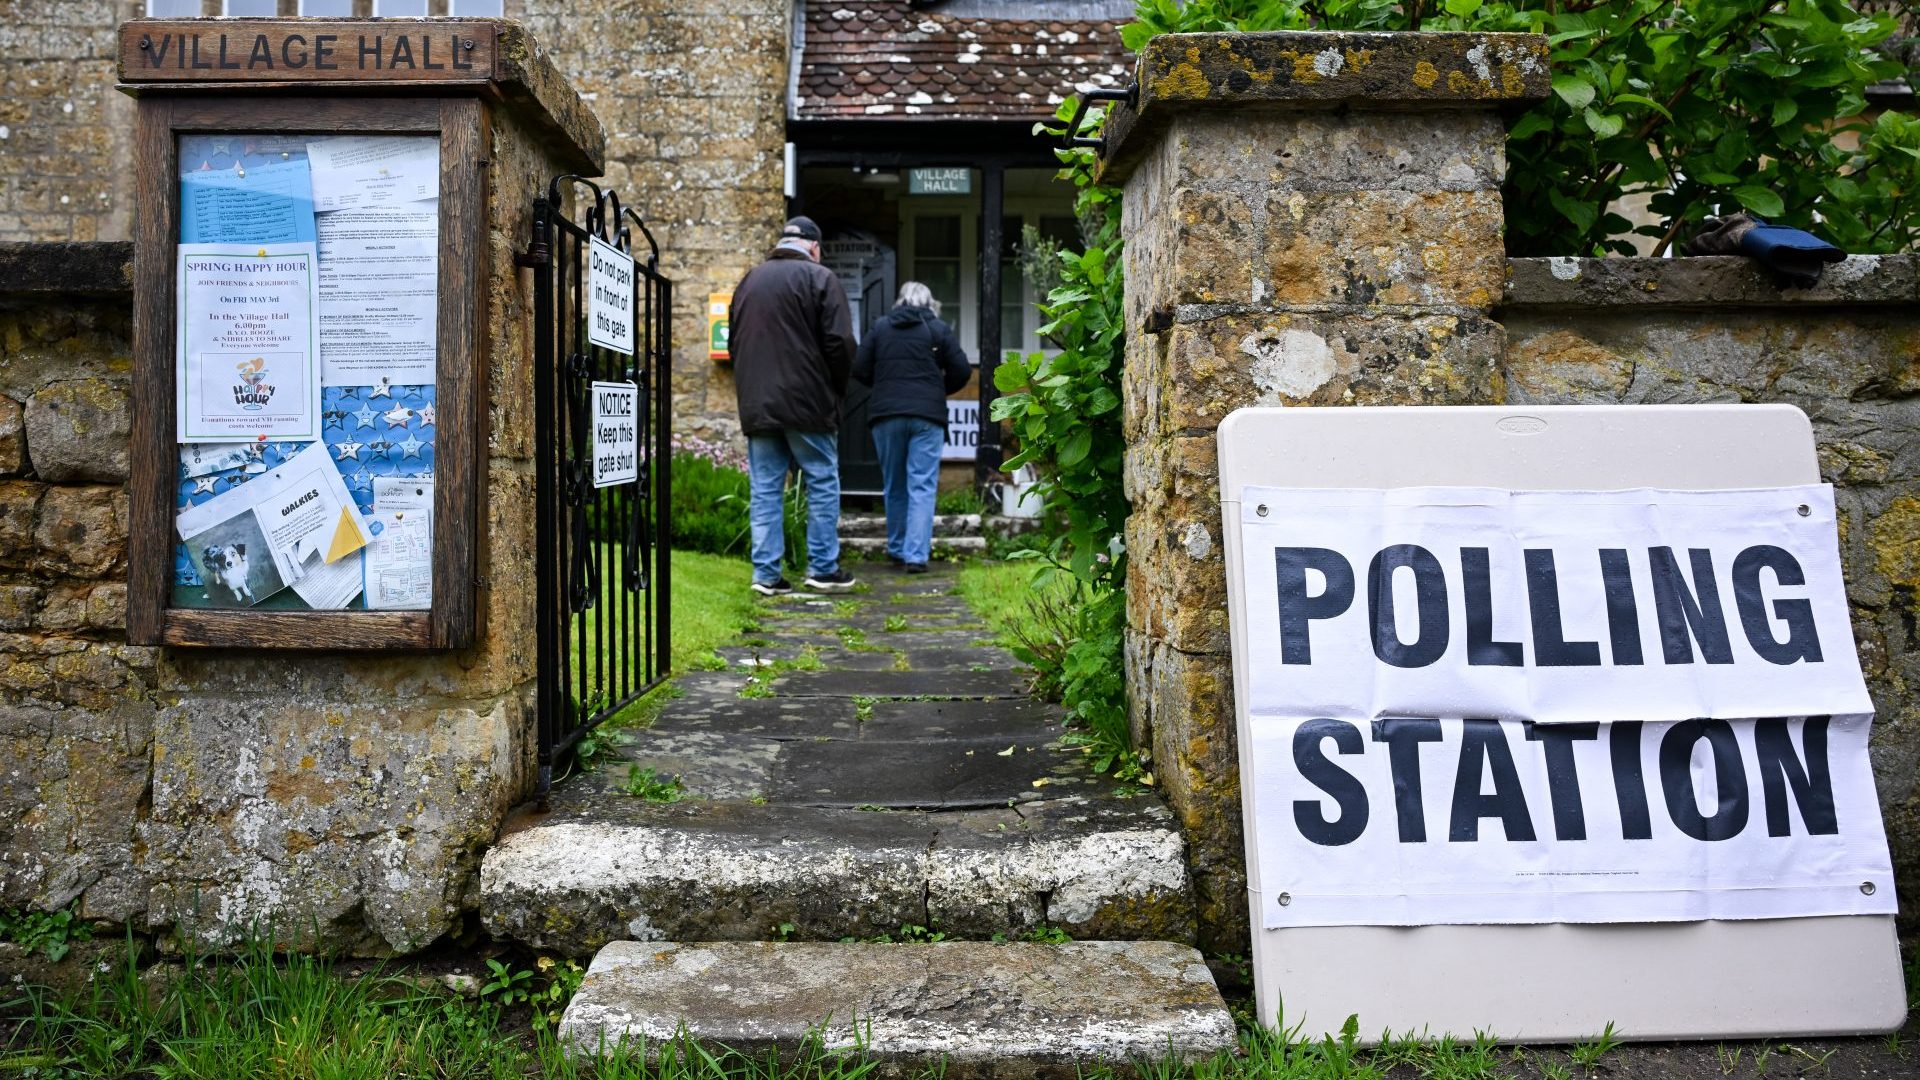 The village polling station in Walditch, Dorset (Photo by Finnbarr Webster/Getty Images)